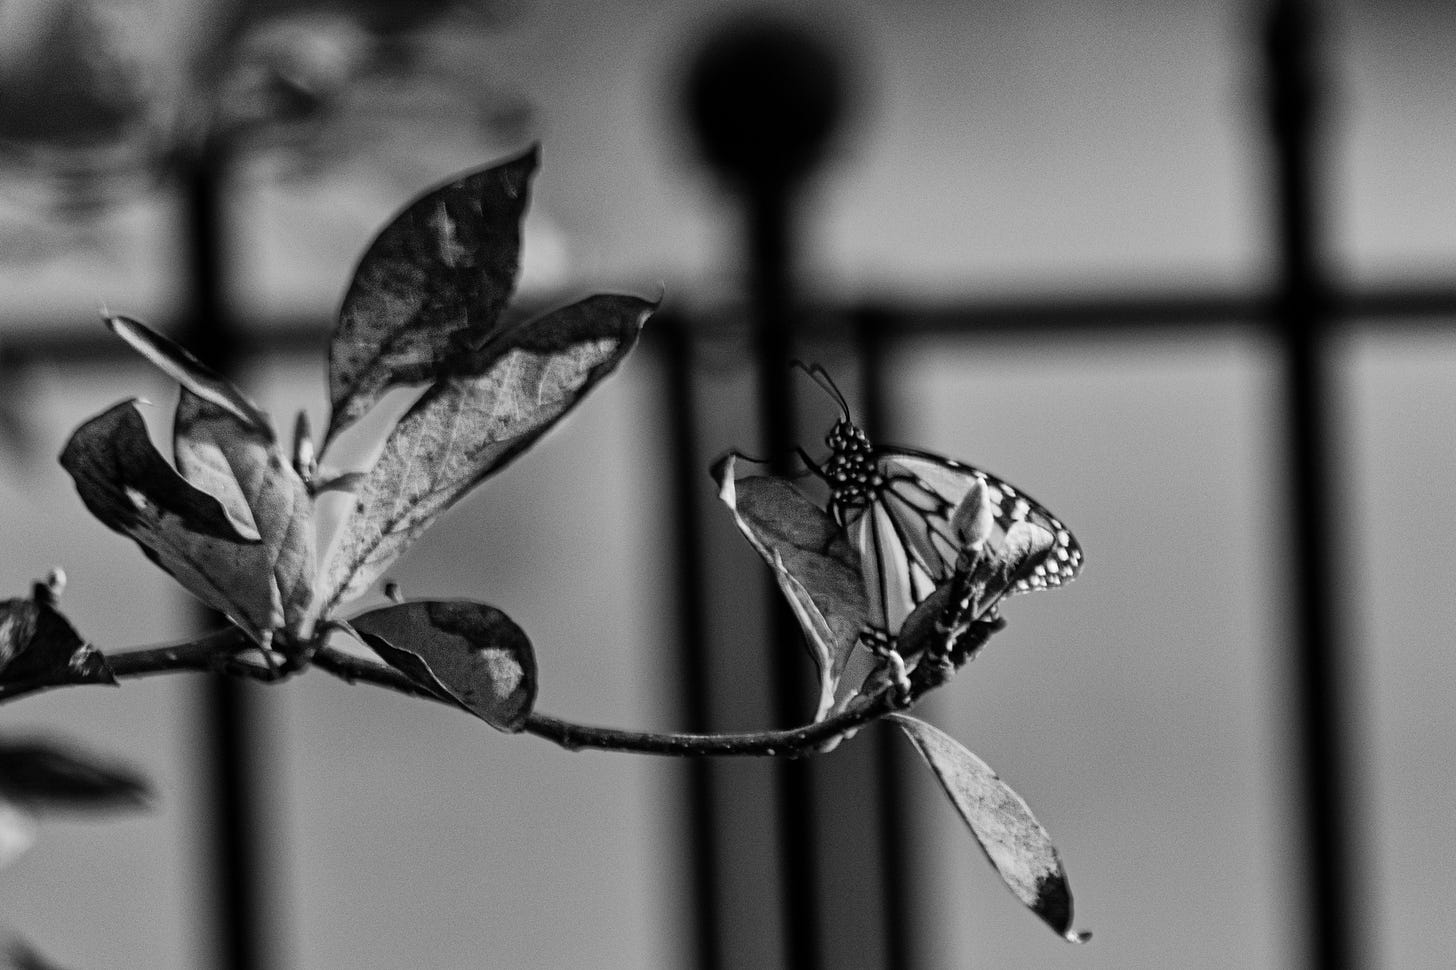 Black and white photo of a butterfly on a branch with the outline of an oron fence in the background